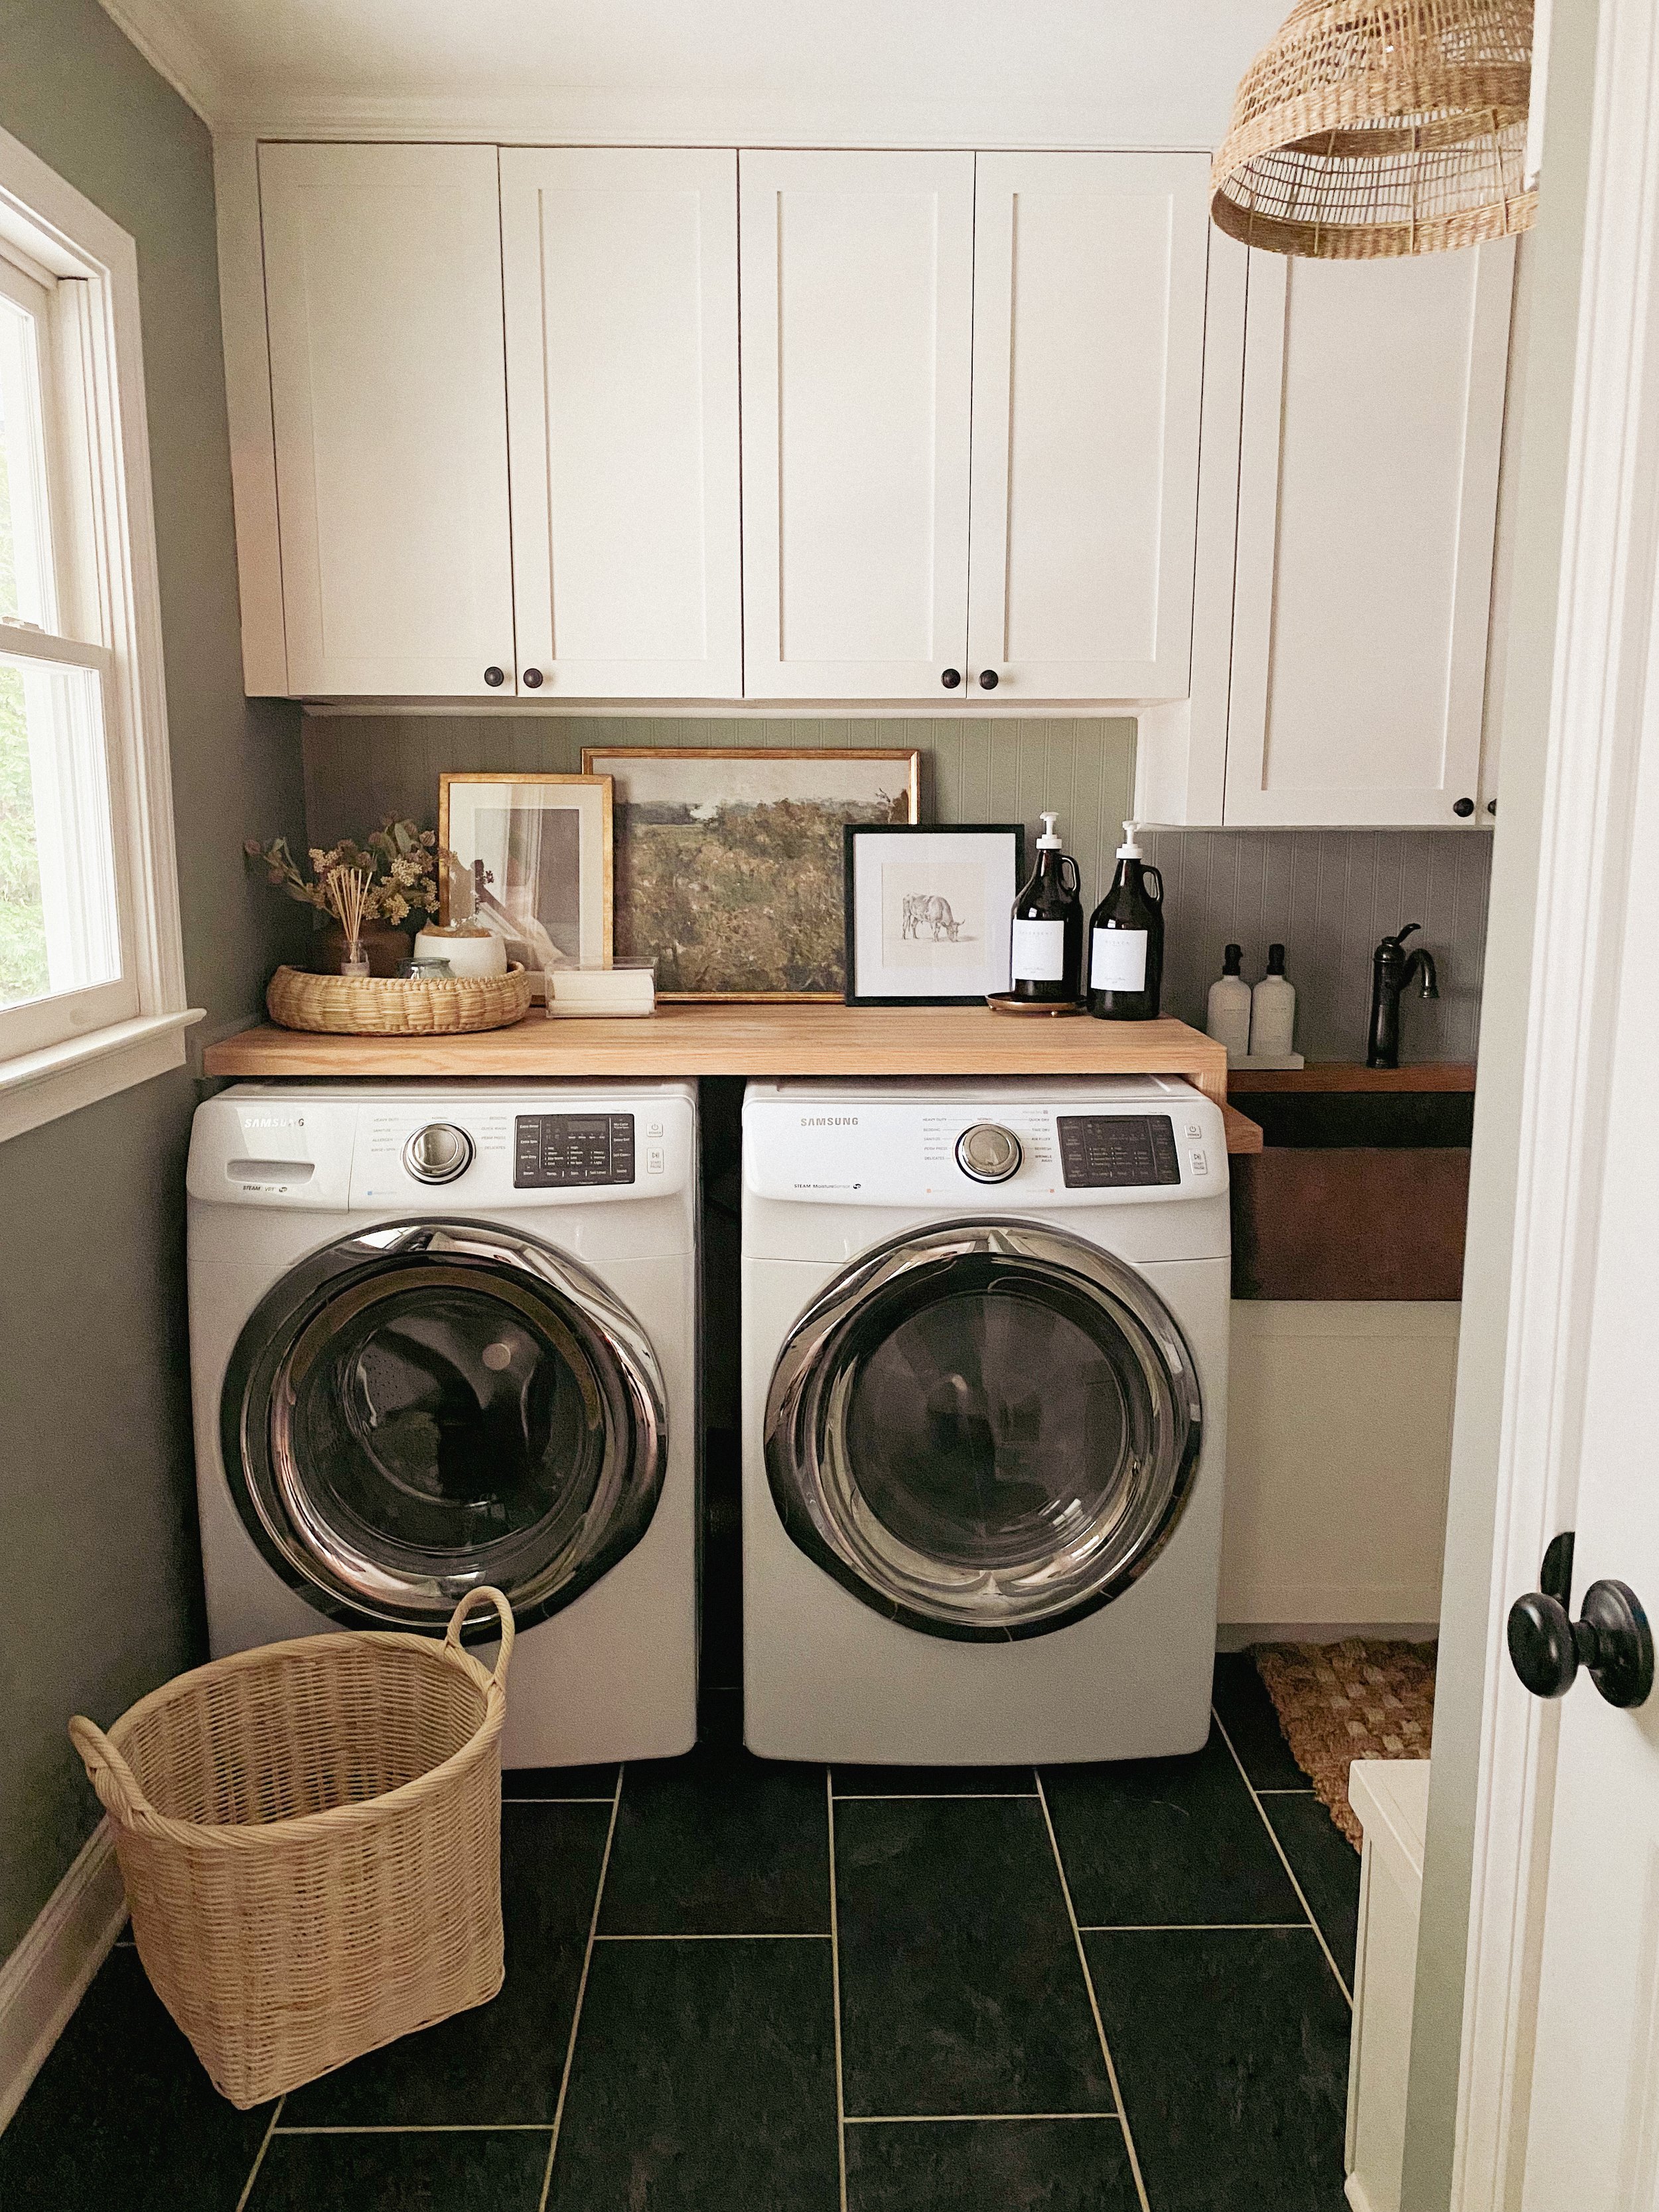 Emily's Transitional Laundry Room refresh in her home! — Porche & Co.